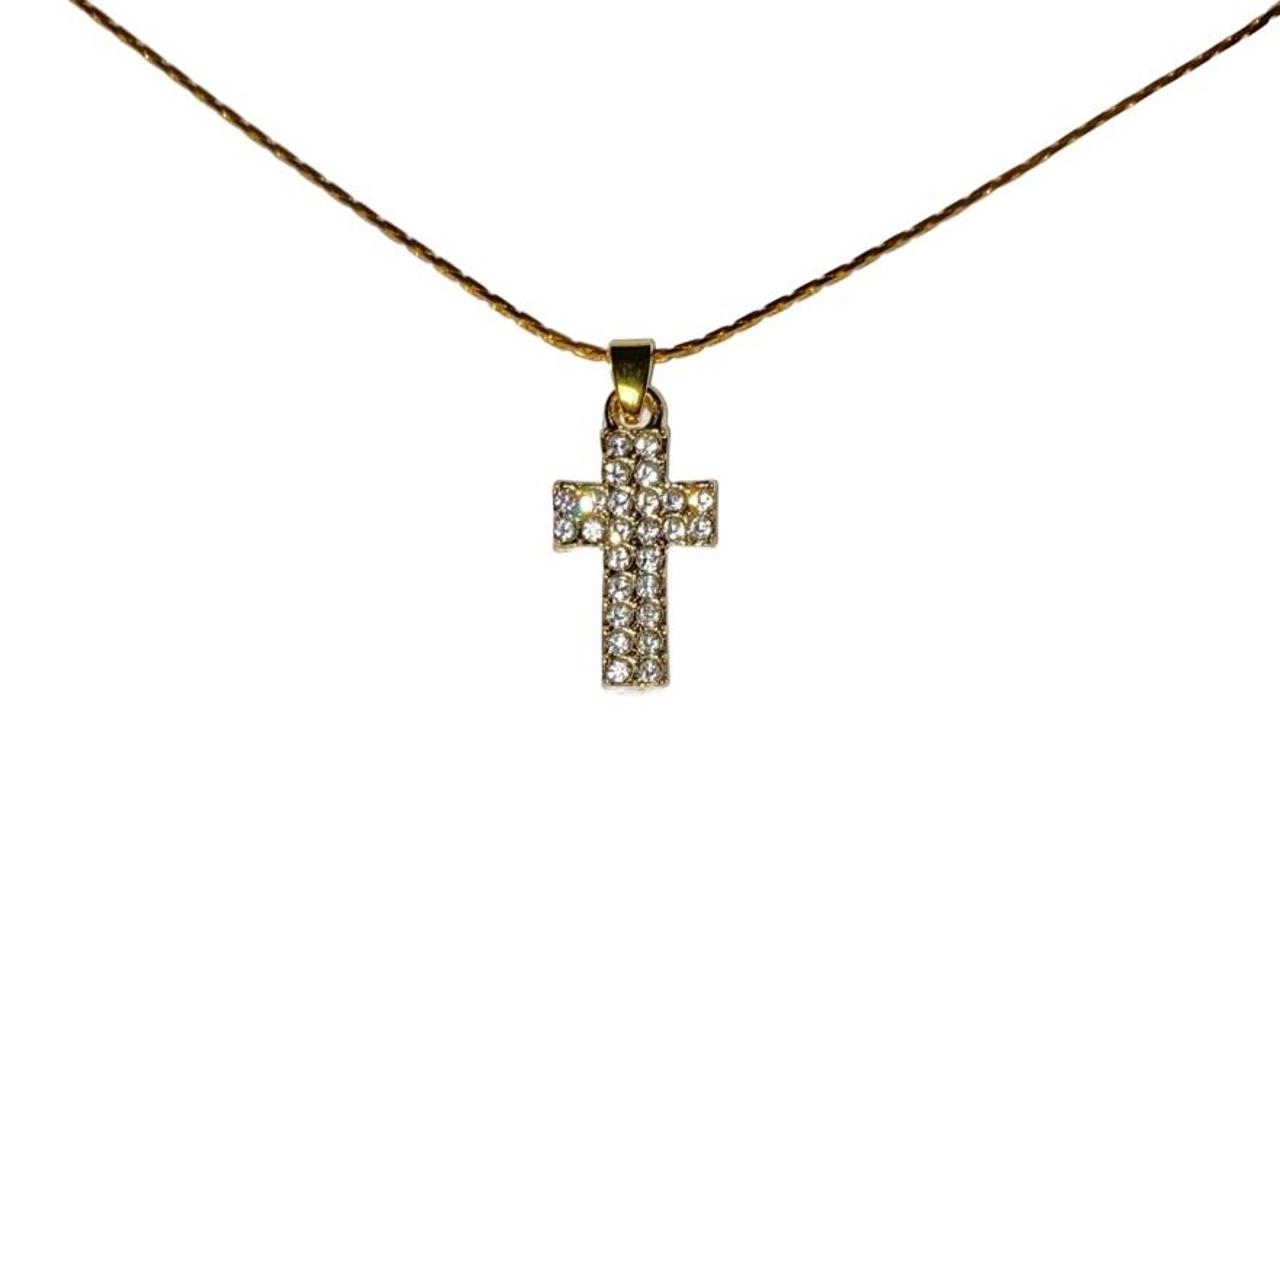 Chic 14k Gold Cross: Tiny Cross Necklace, Dainty Necklace, Ideal Gift for  Her - 18